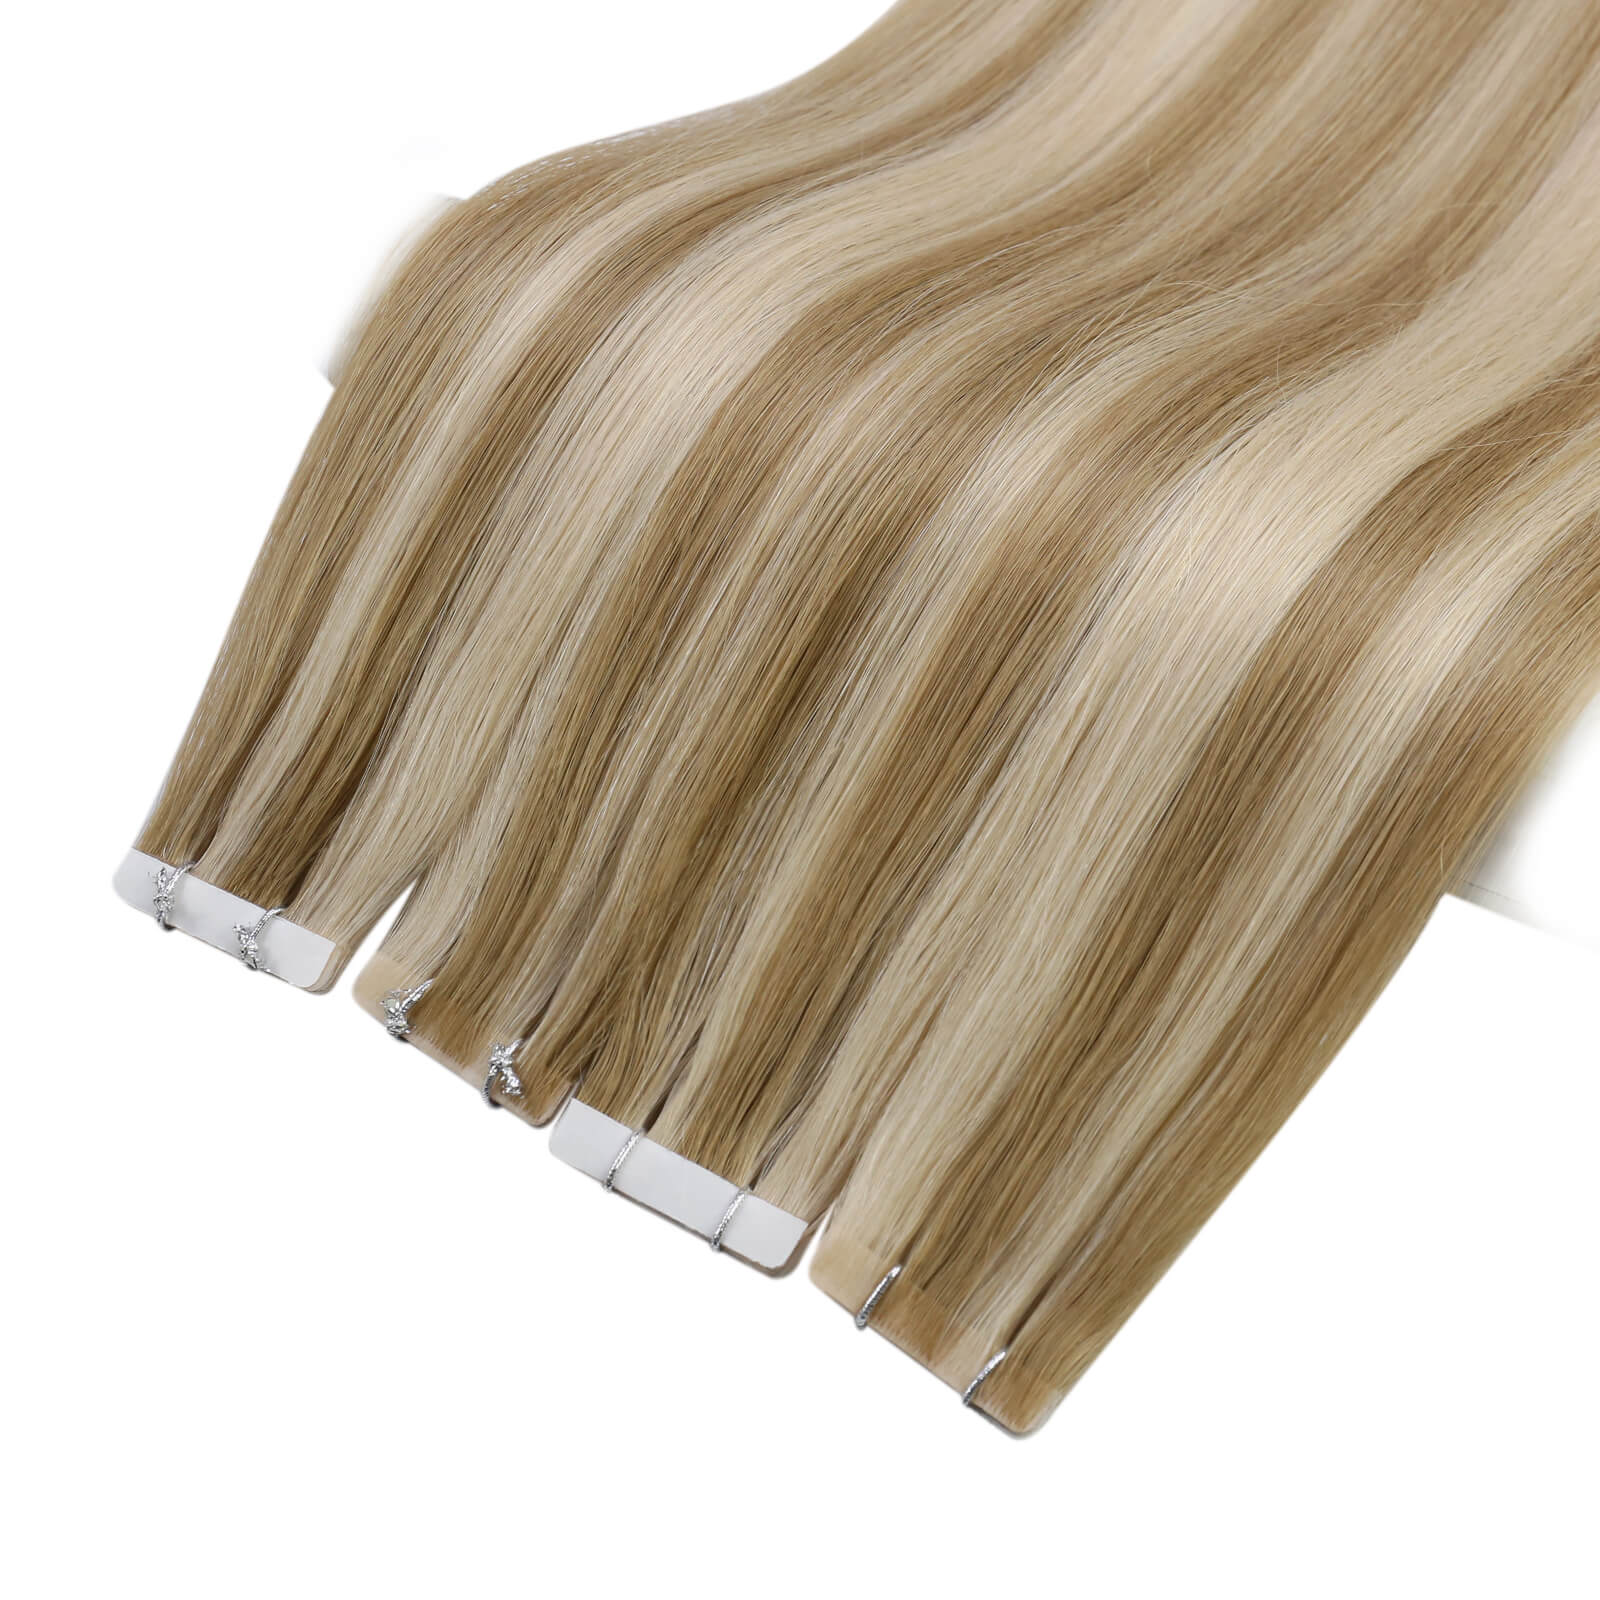 tape hair extensions,real human hair,tape ins,tape hair extensions,real human hair extensions,22 inch hair extensions